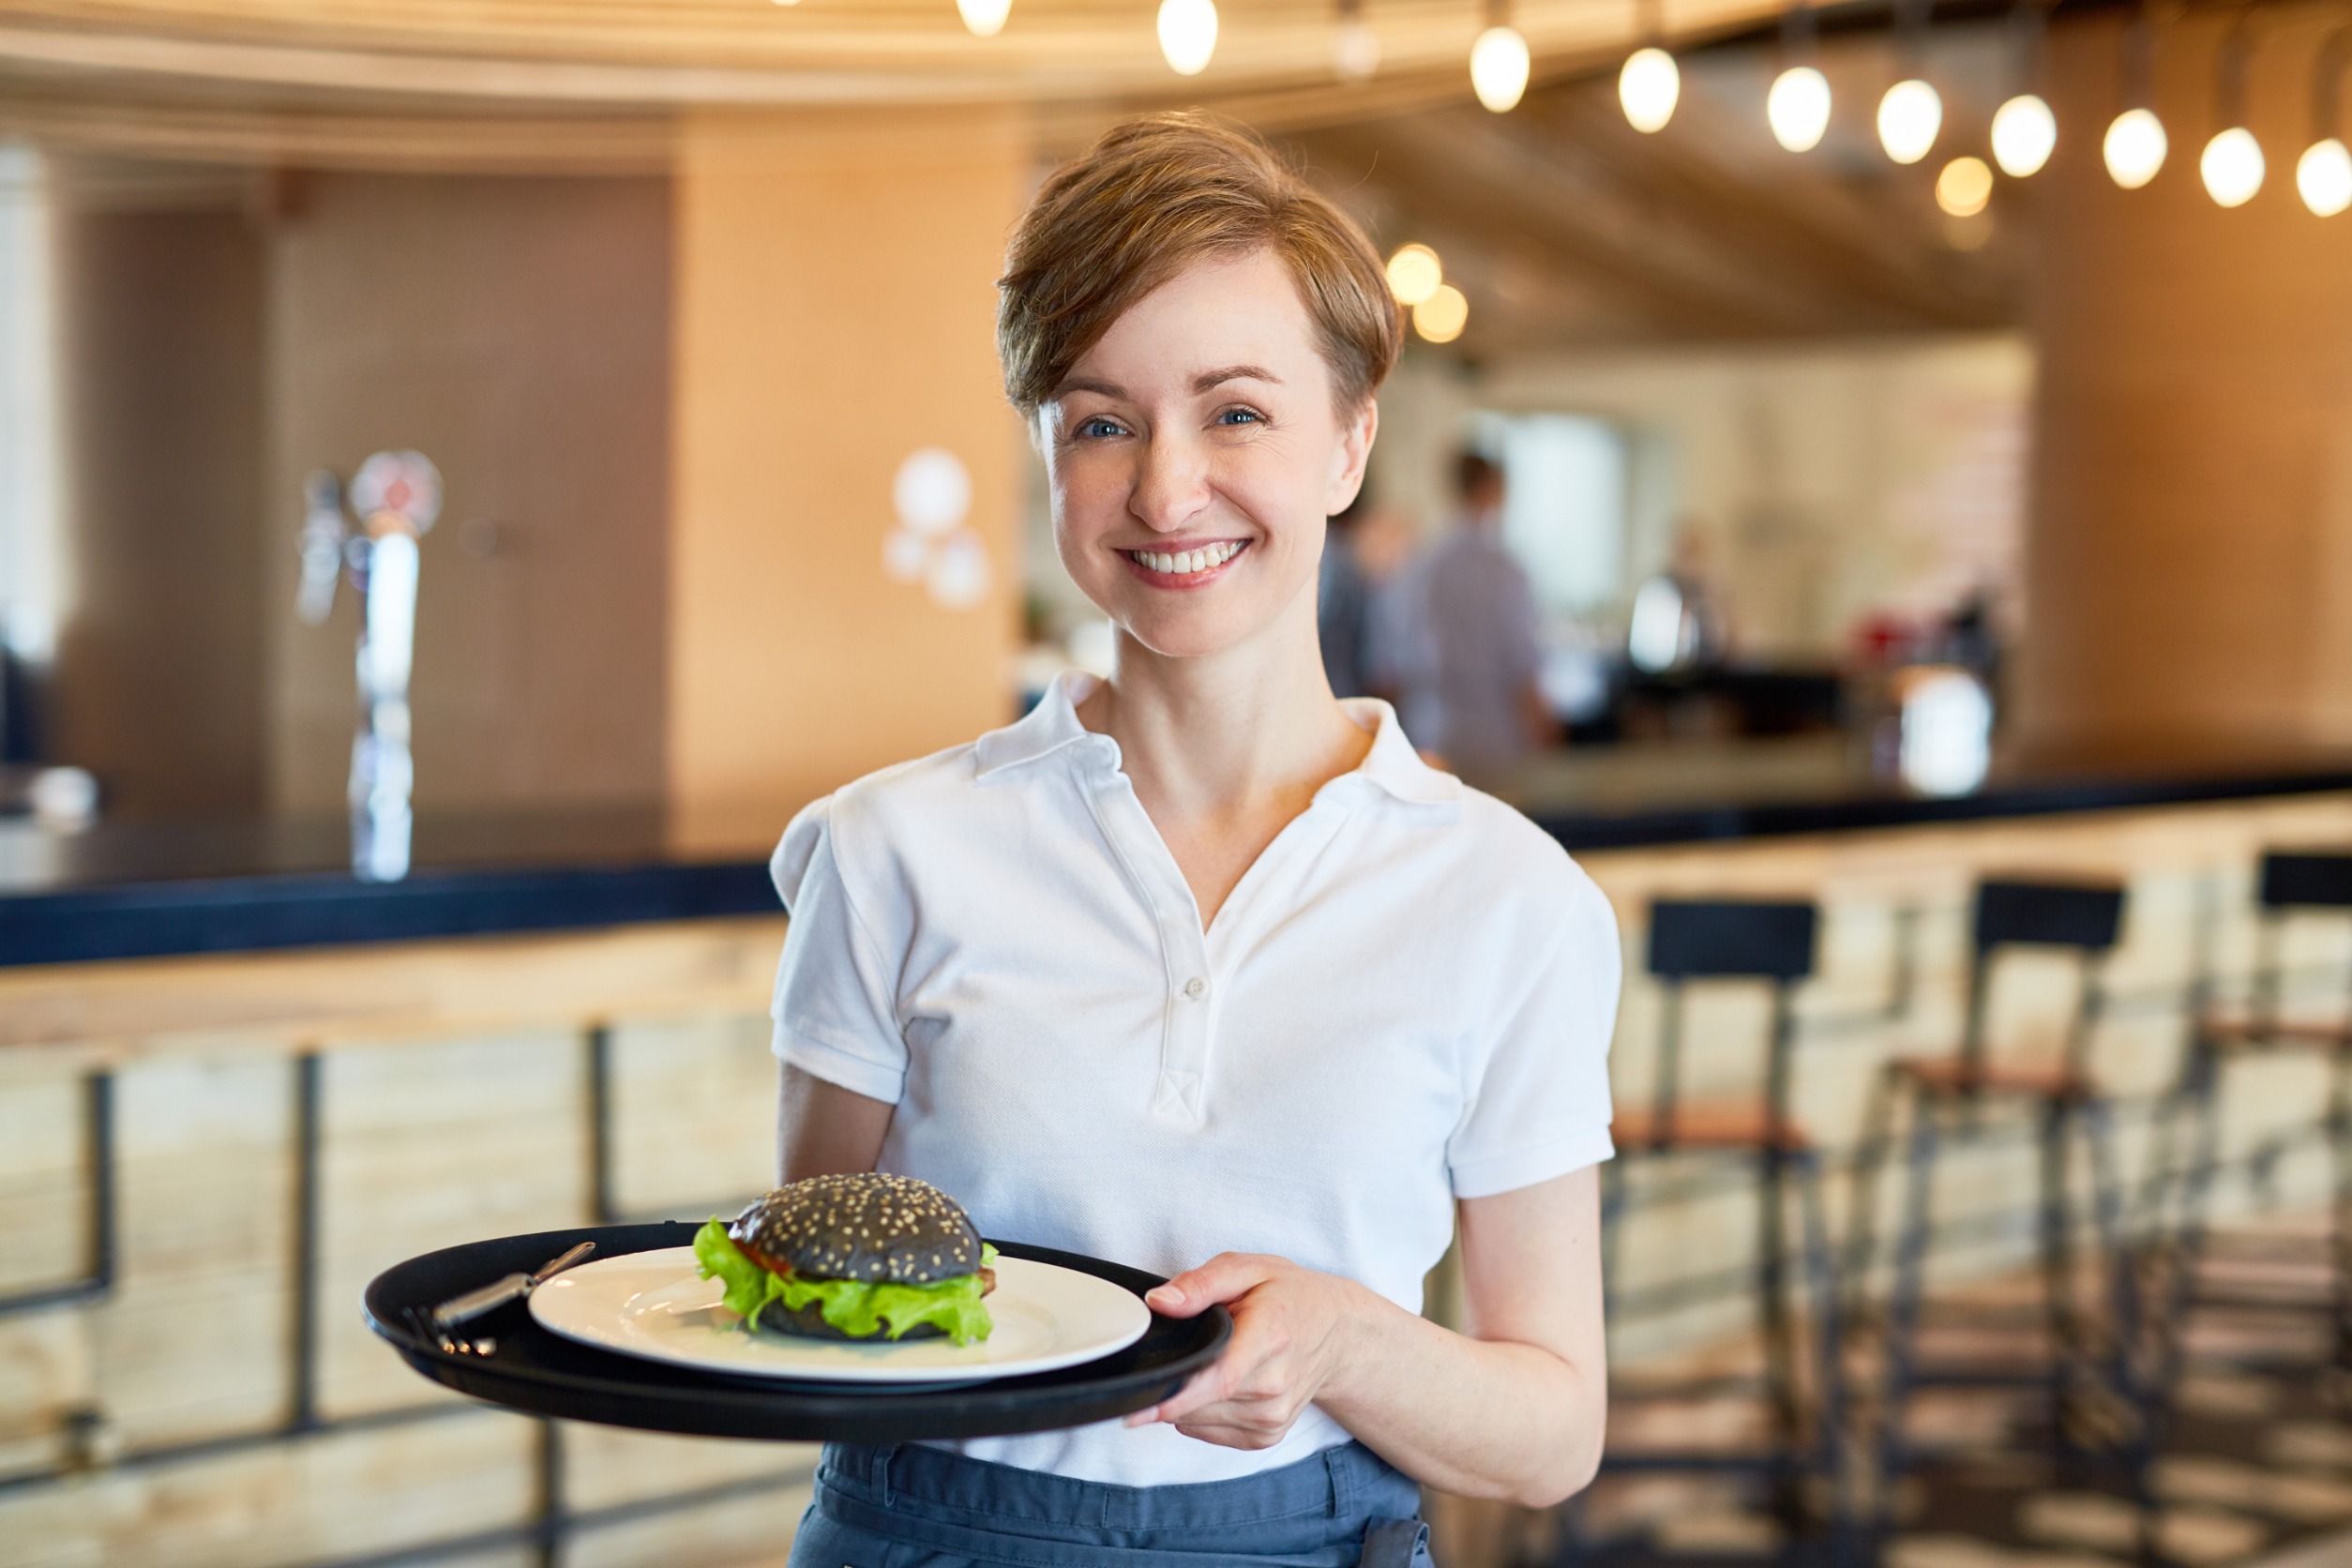 "They went out of their way to accommodate me." If the service provider fulfilled special requests or went above and beyond, you might feel they deserve a higher tip. This consideration can prompt you to adjust your tip accordingly. :: 123rf